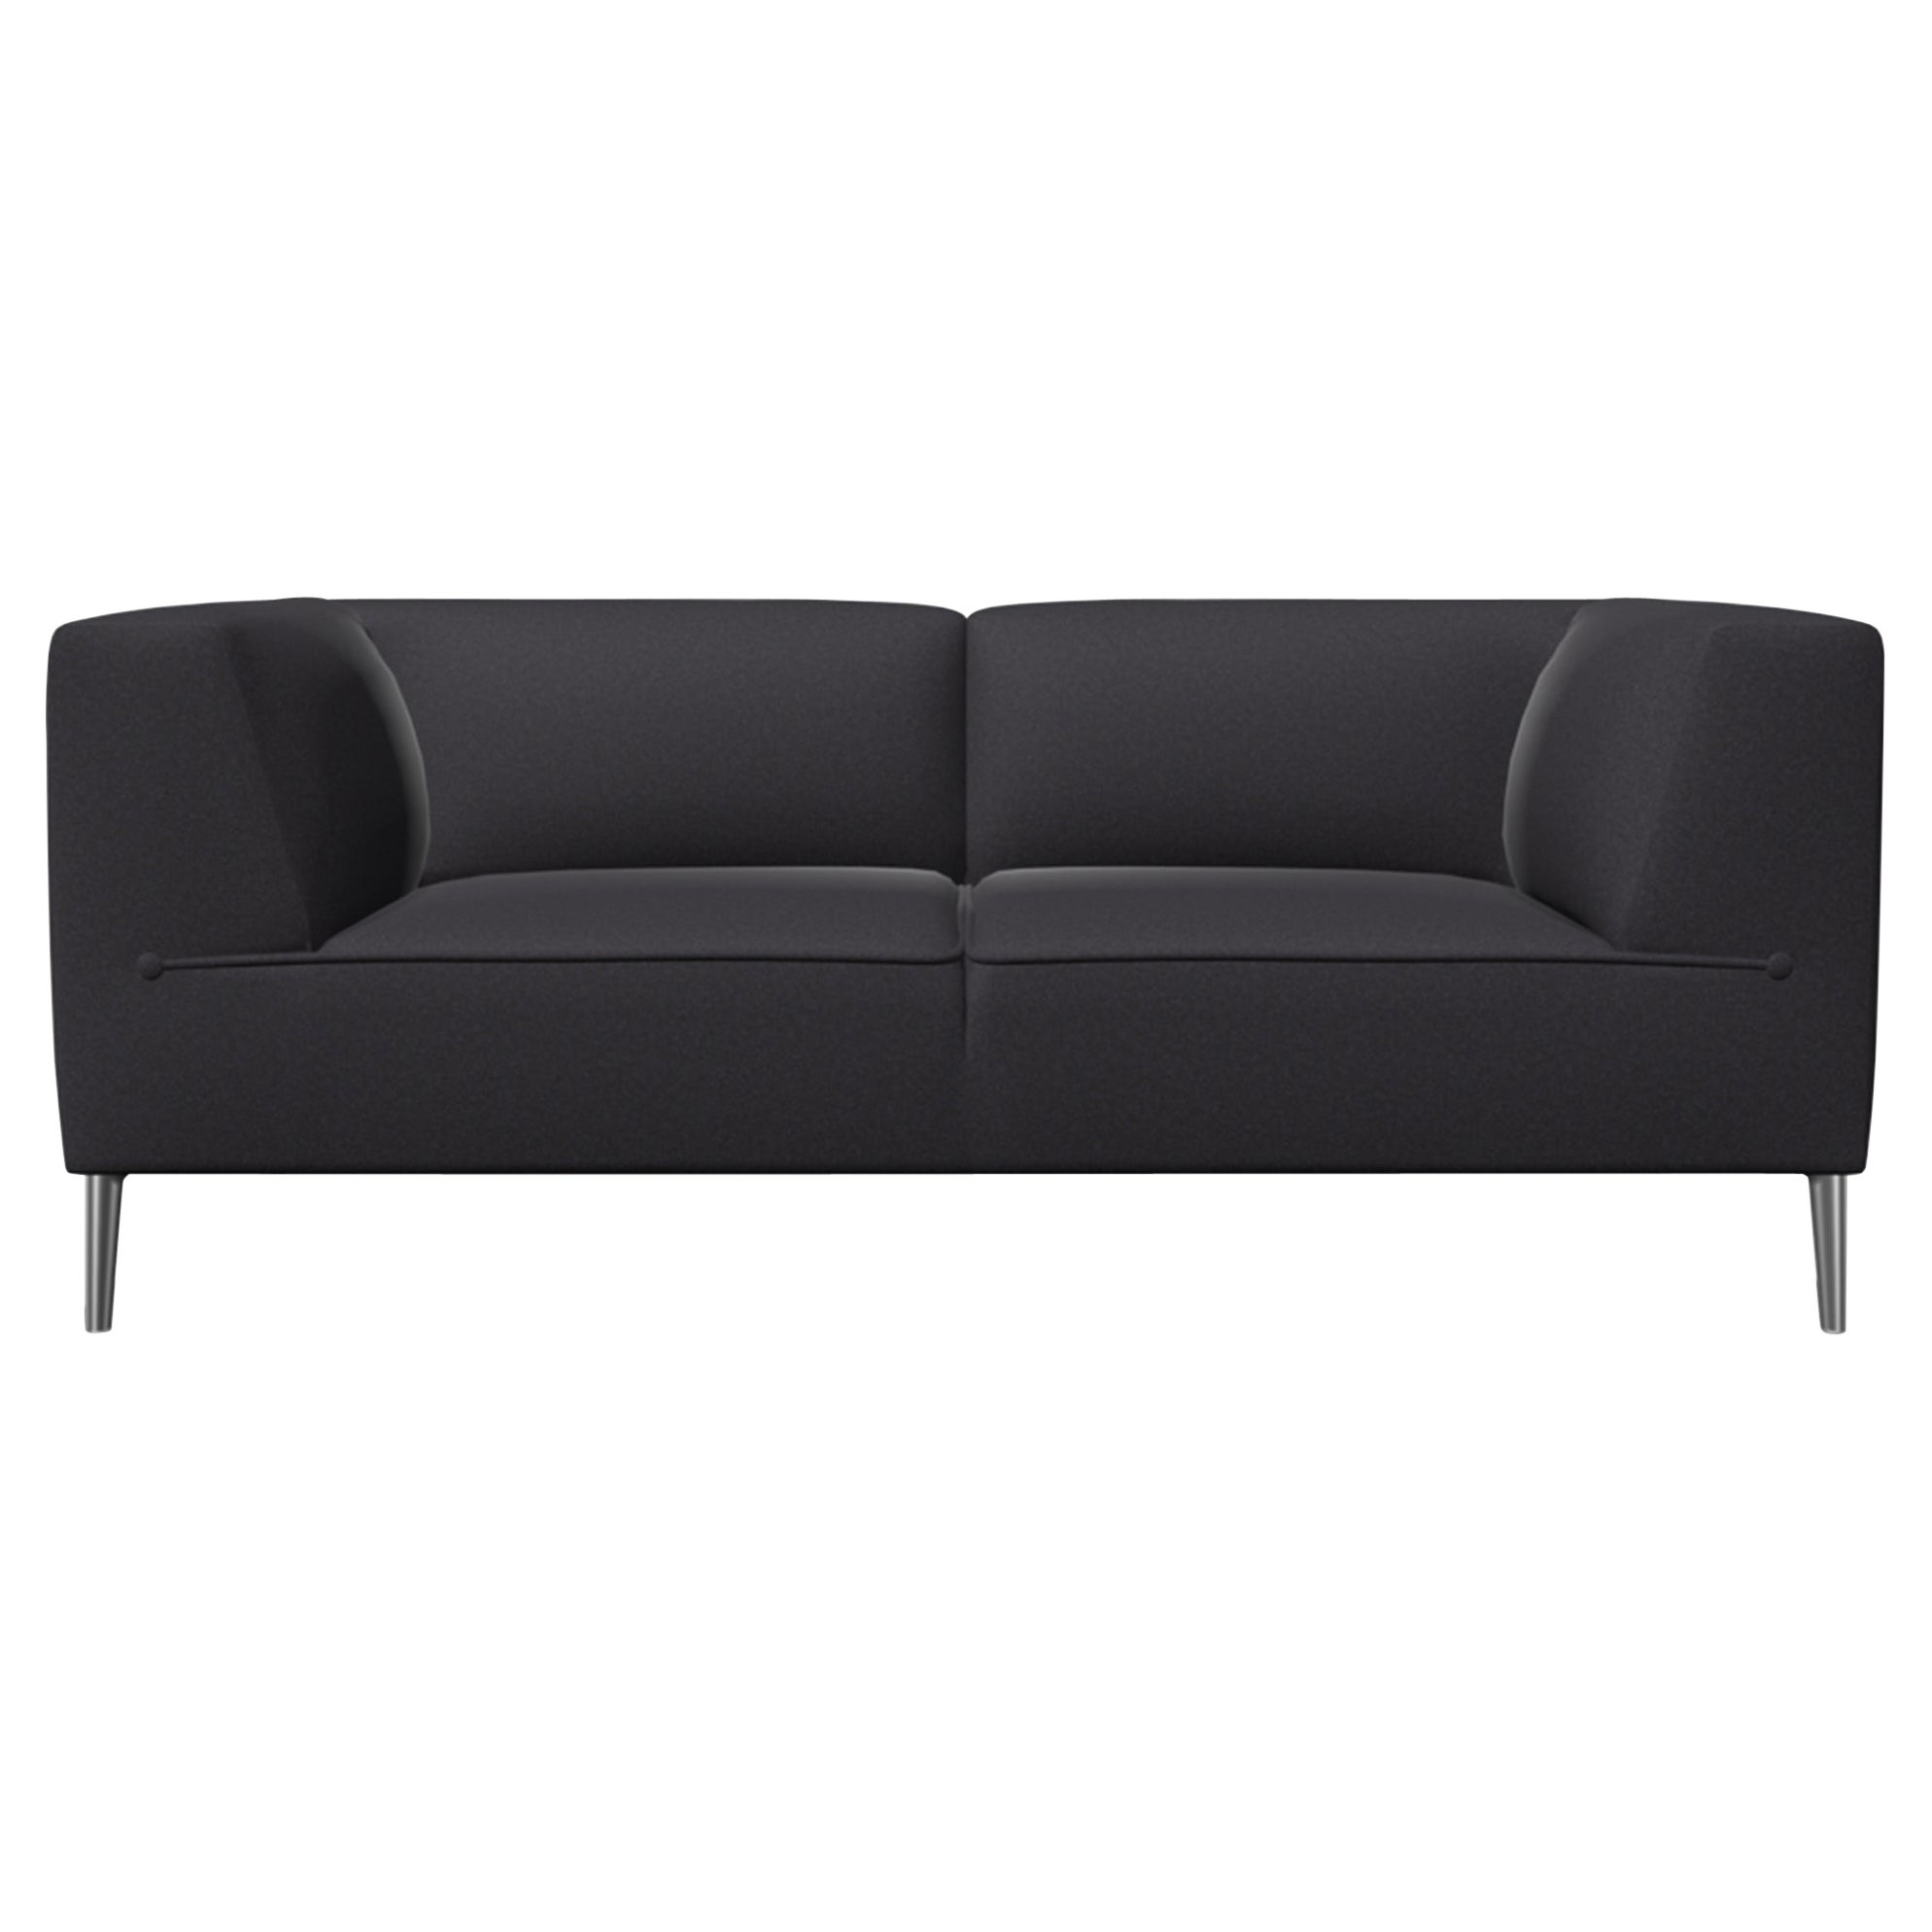 Moooi Double Seat Sofa So Good in Black Upholstery with Polished Aluminum Feet